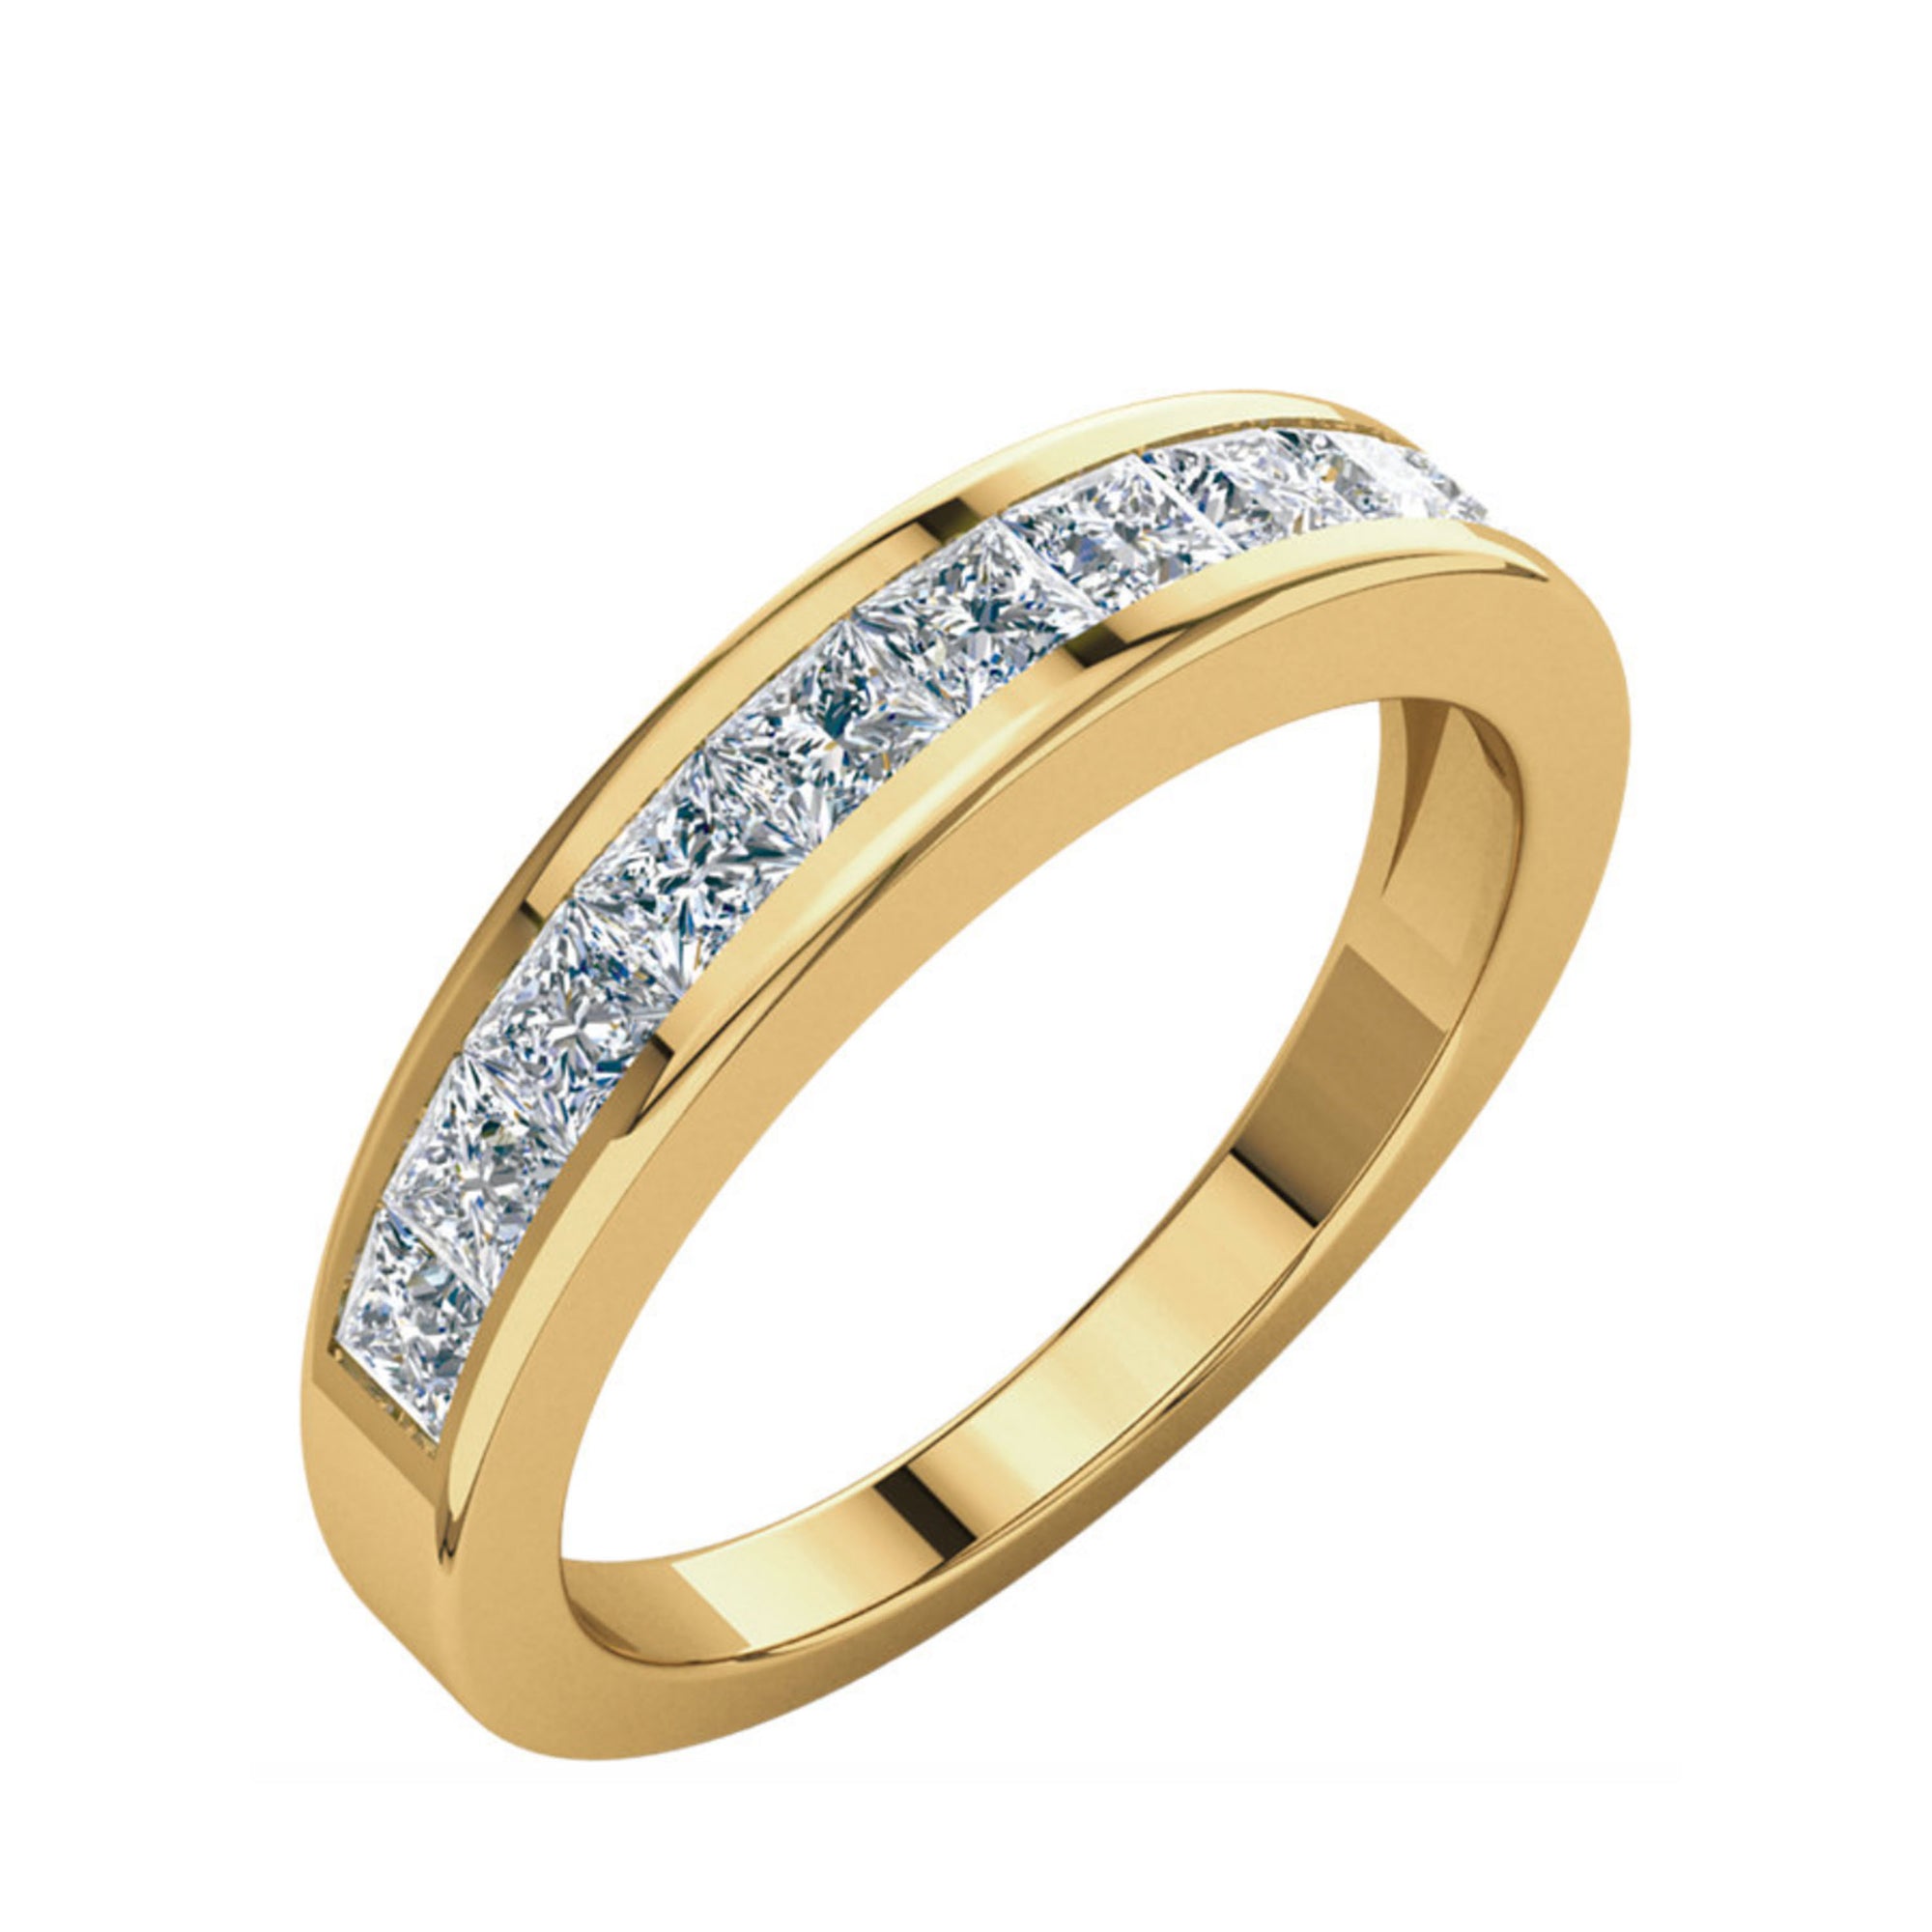 Channel Set, Princess-Cut Diamond Anniversary Stack Band in White, Yellow or Rose Gold - Talisman Collection Fine Jewelers